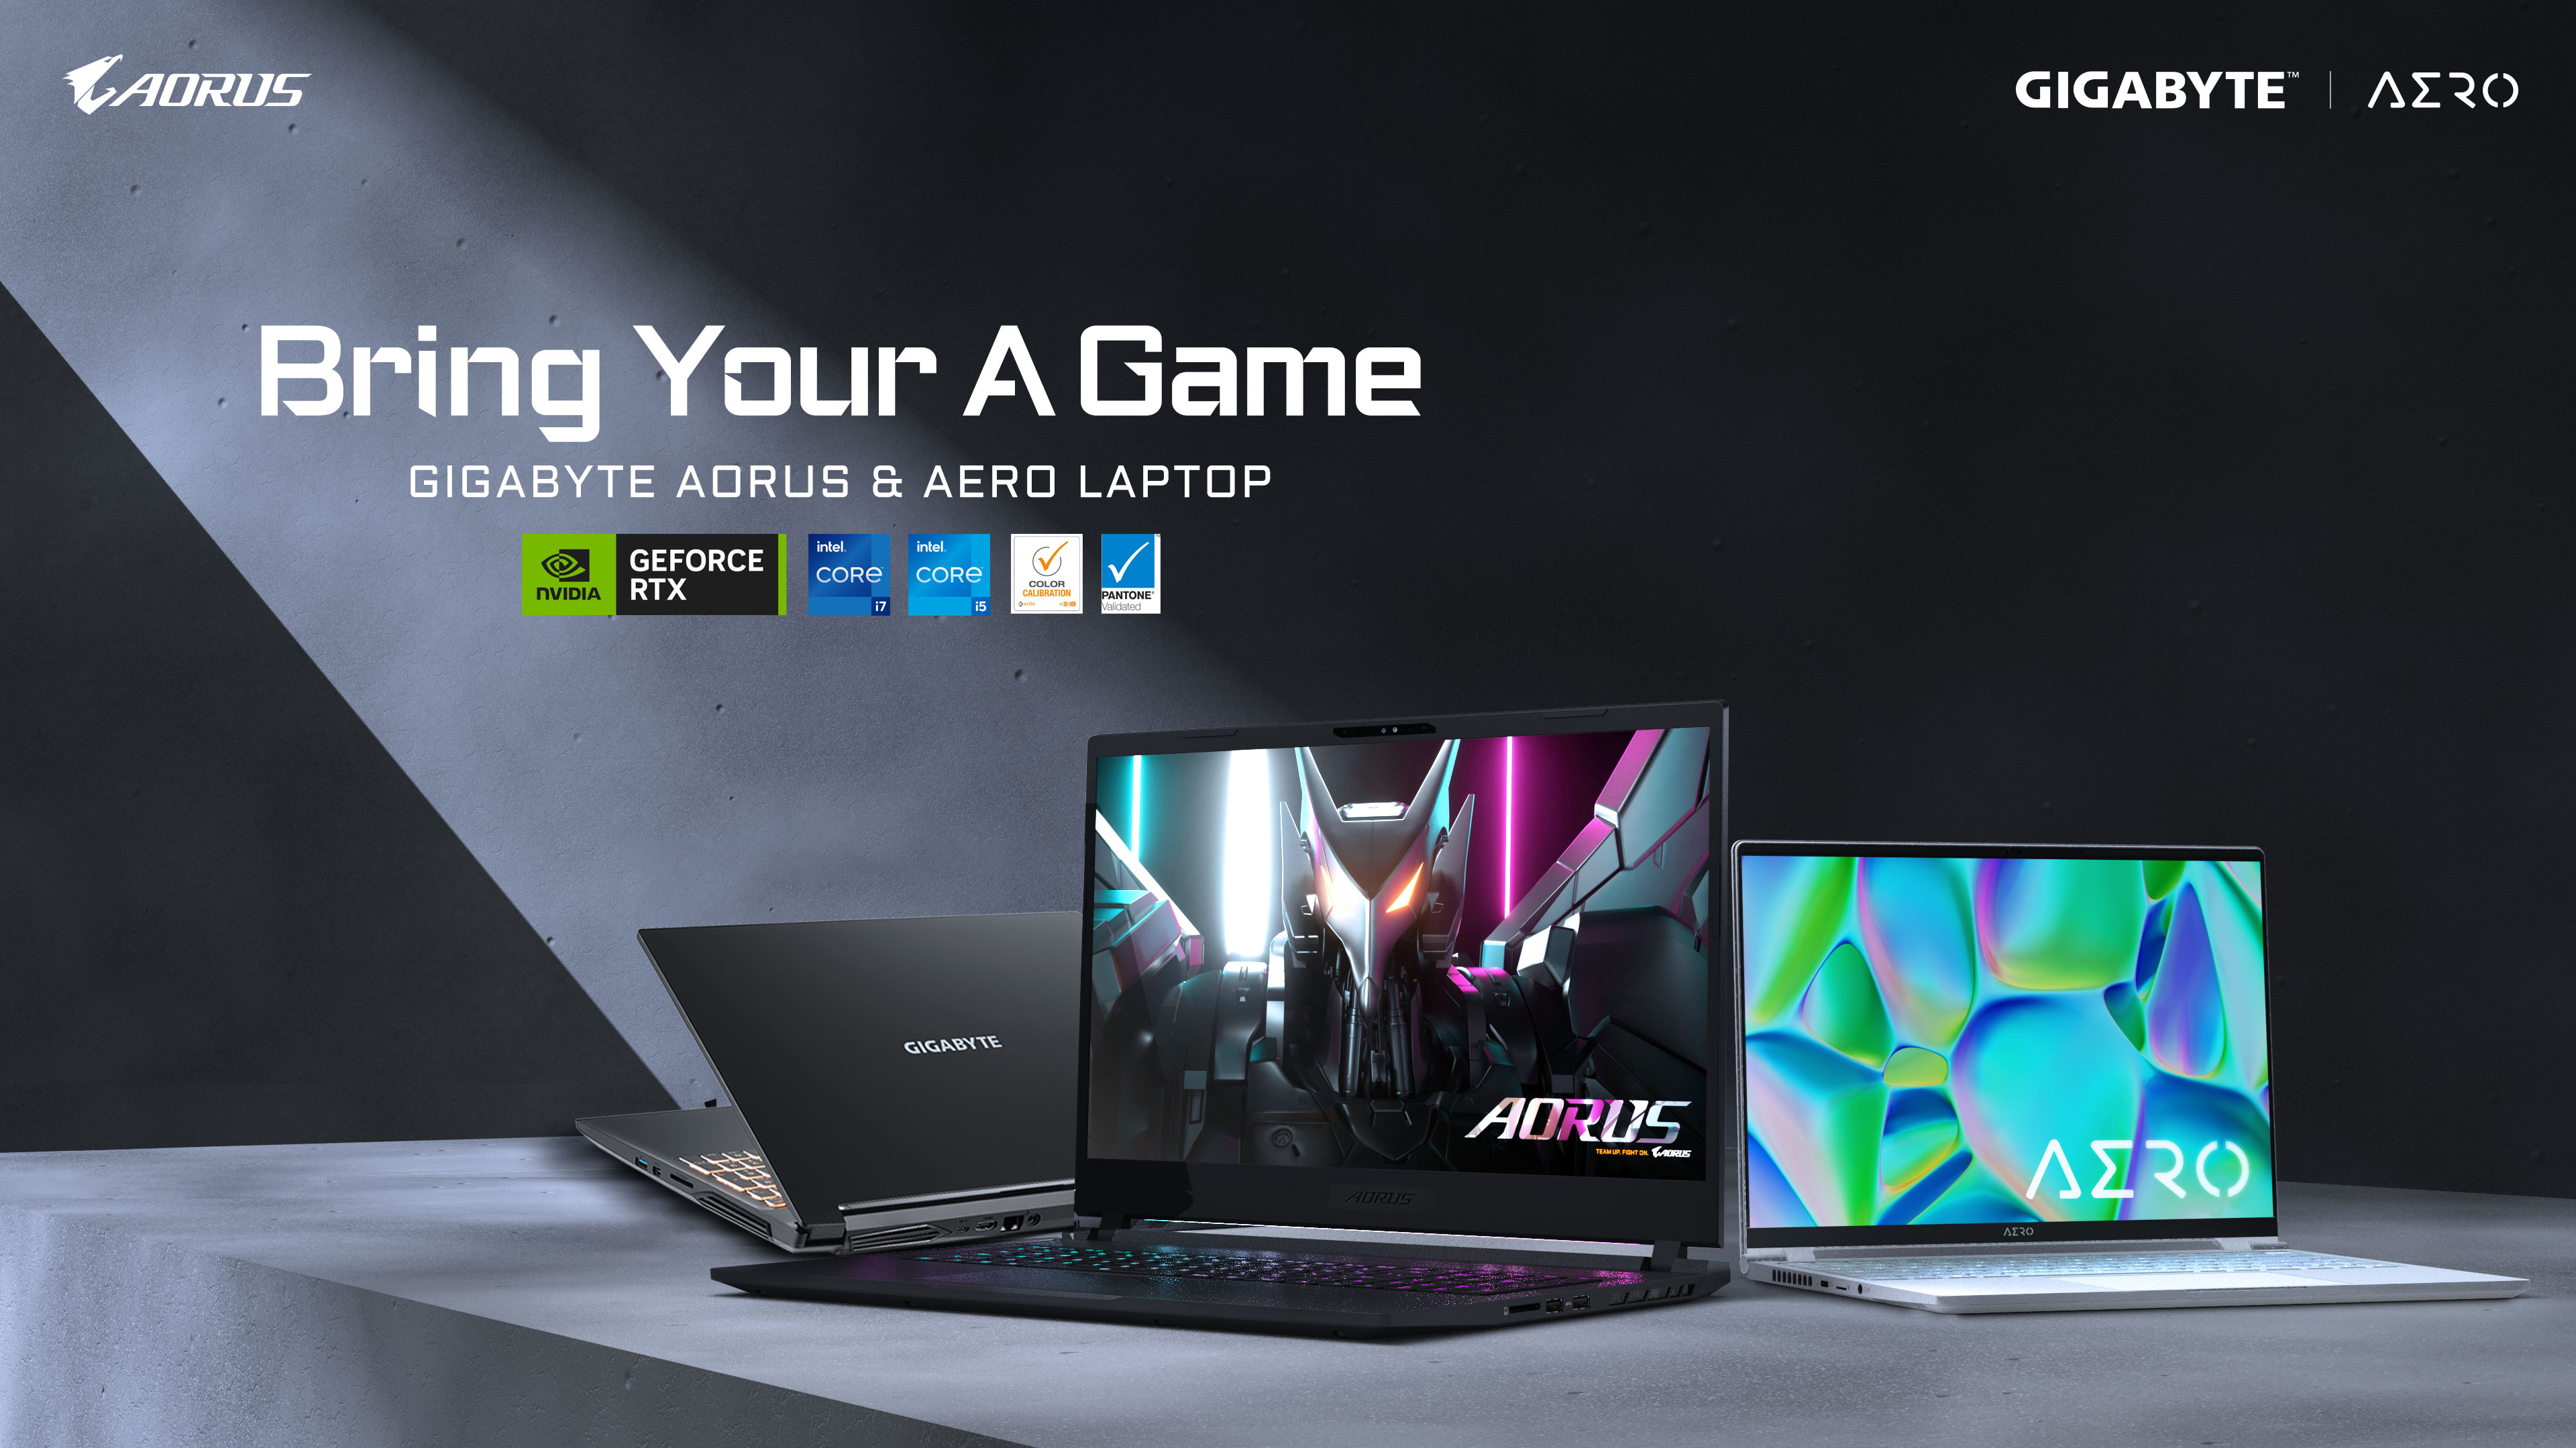 GIGABYTE Launches New Laptops with Nvidia RTX40, expanding AORUS, AERO, and G5 Line-up